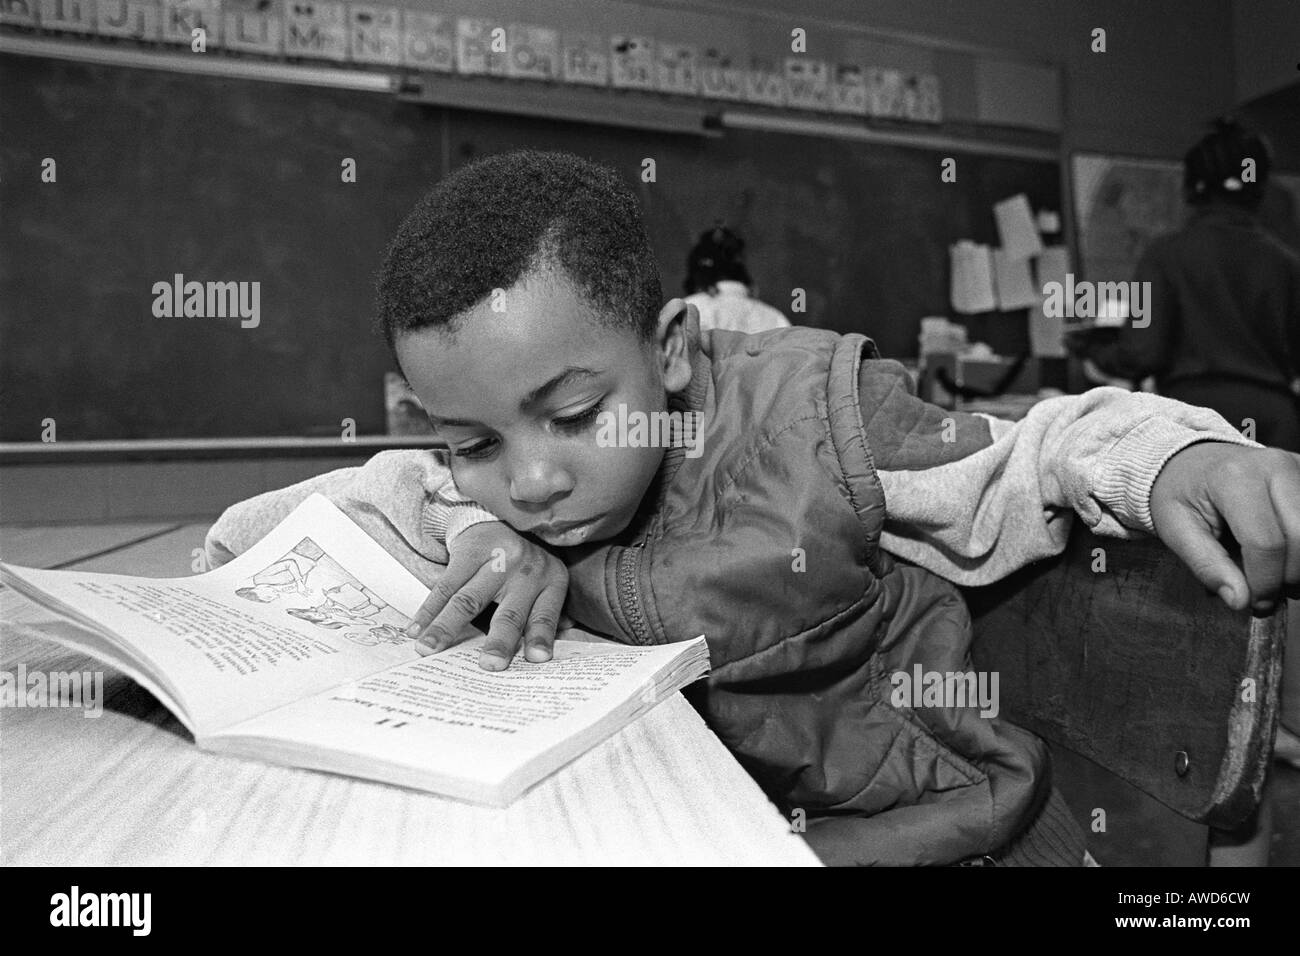 Elementary school child immersed in a book in the classroom Stock Photo